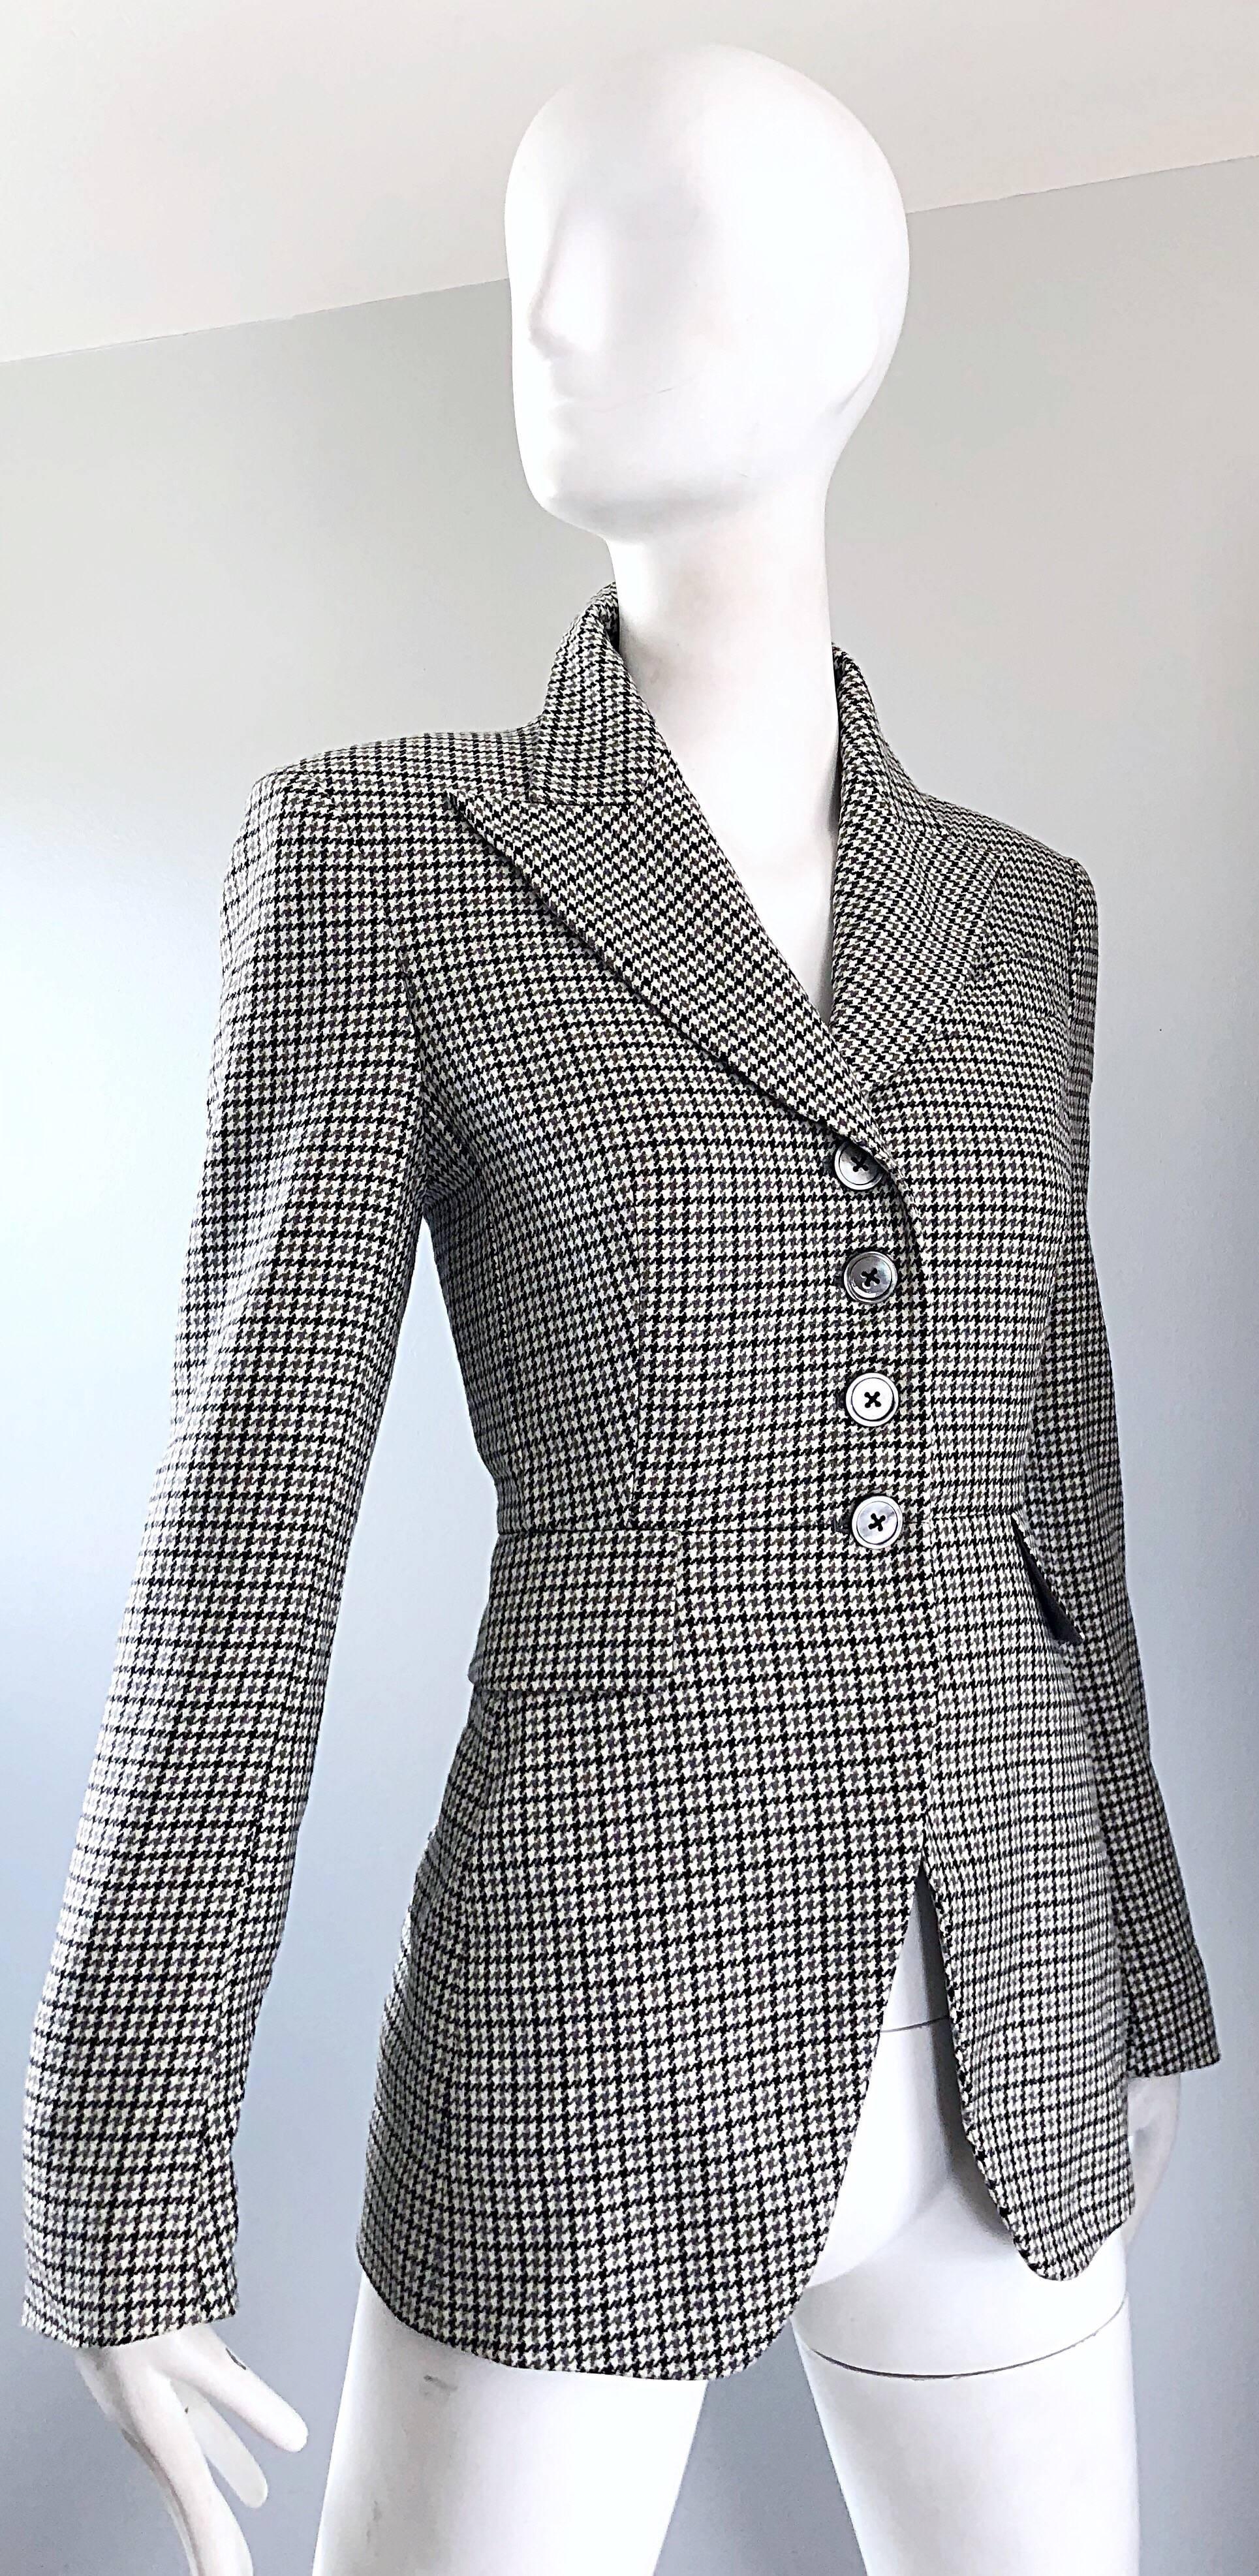 Michael Kors Collection 1990s Size 2 / 4 Gray + Black Houndstooth Blazer Jacket For Sale 5